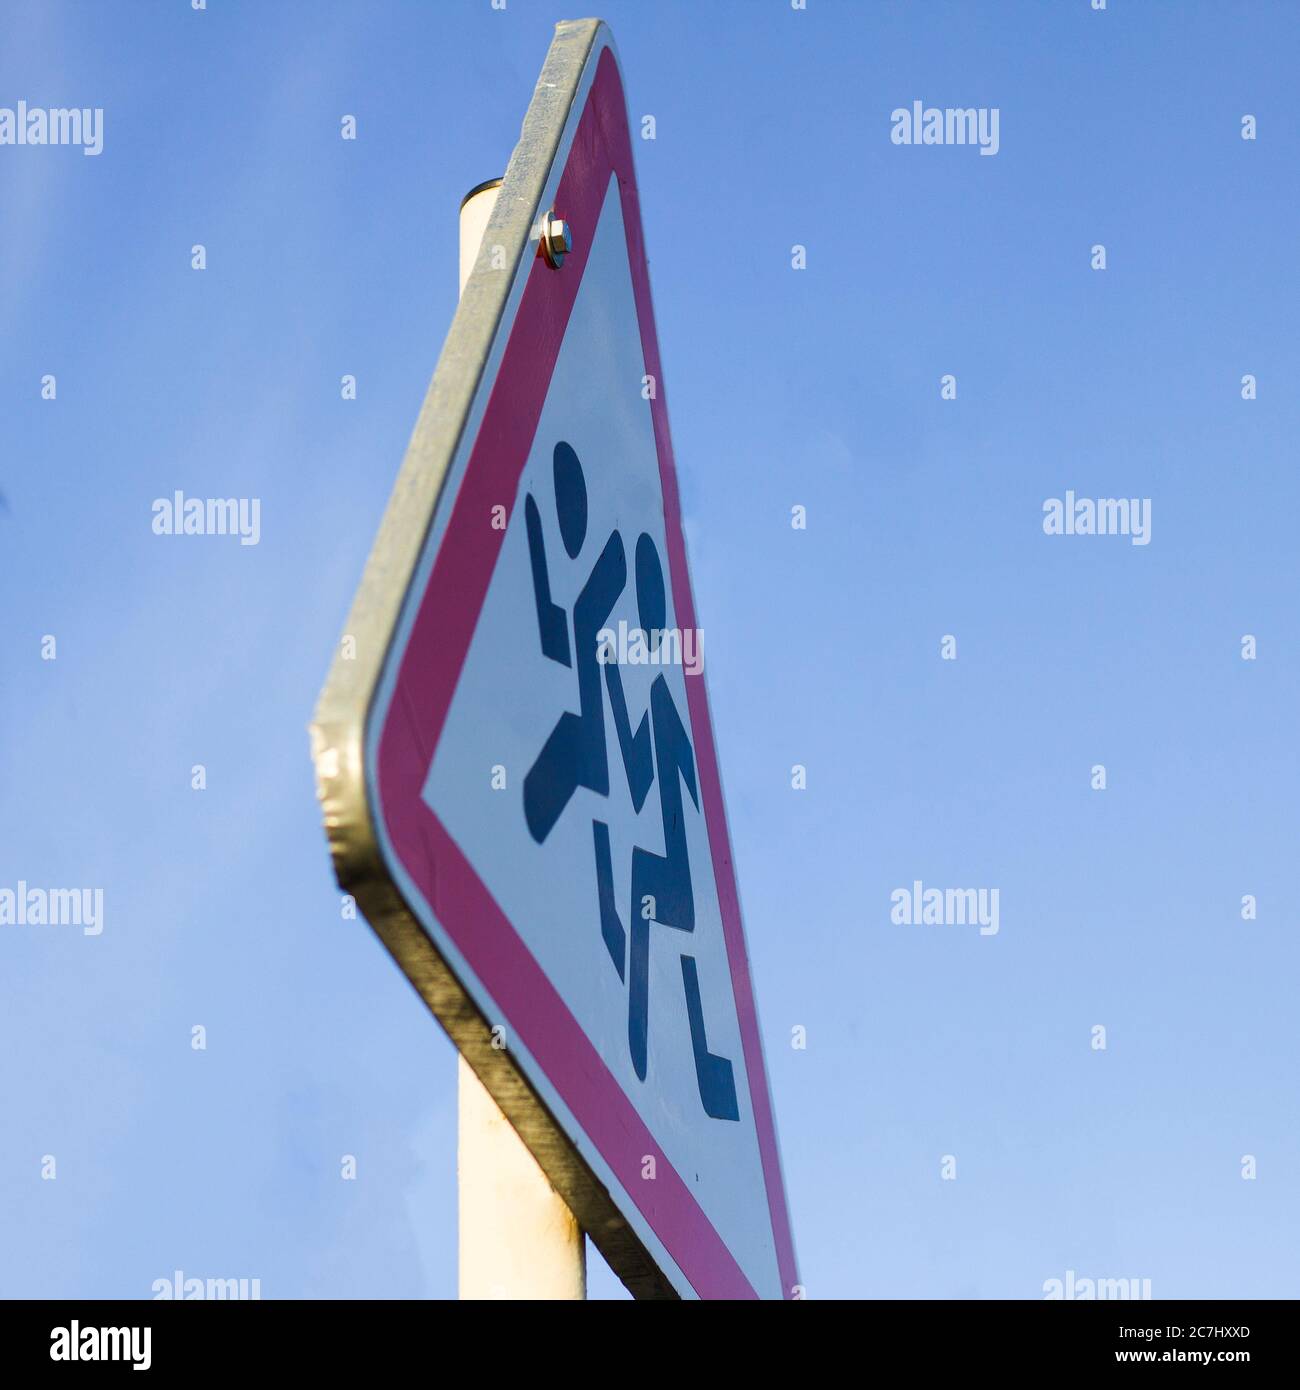 Information road sign, triangular white shield with running figures on blue sky background. Attention, school ahead, reduce speed recommendation. Stock Photo